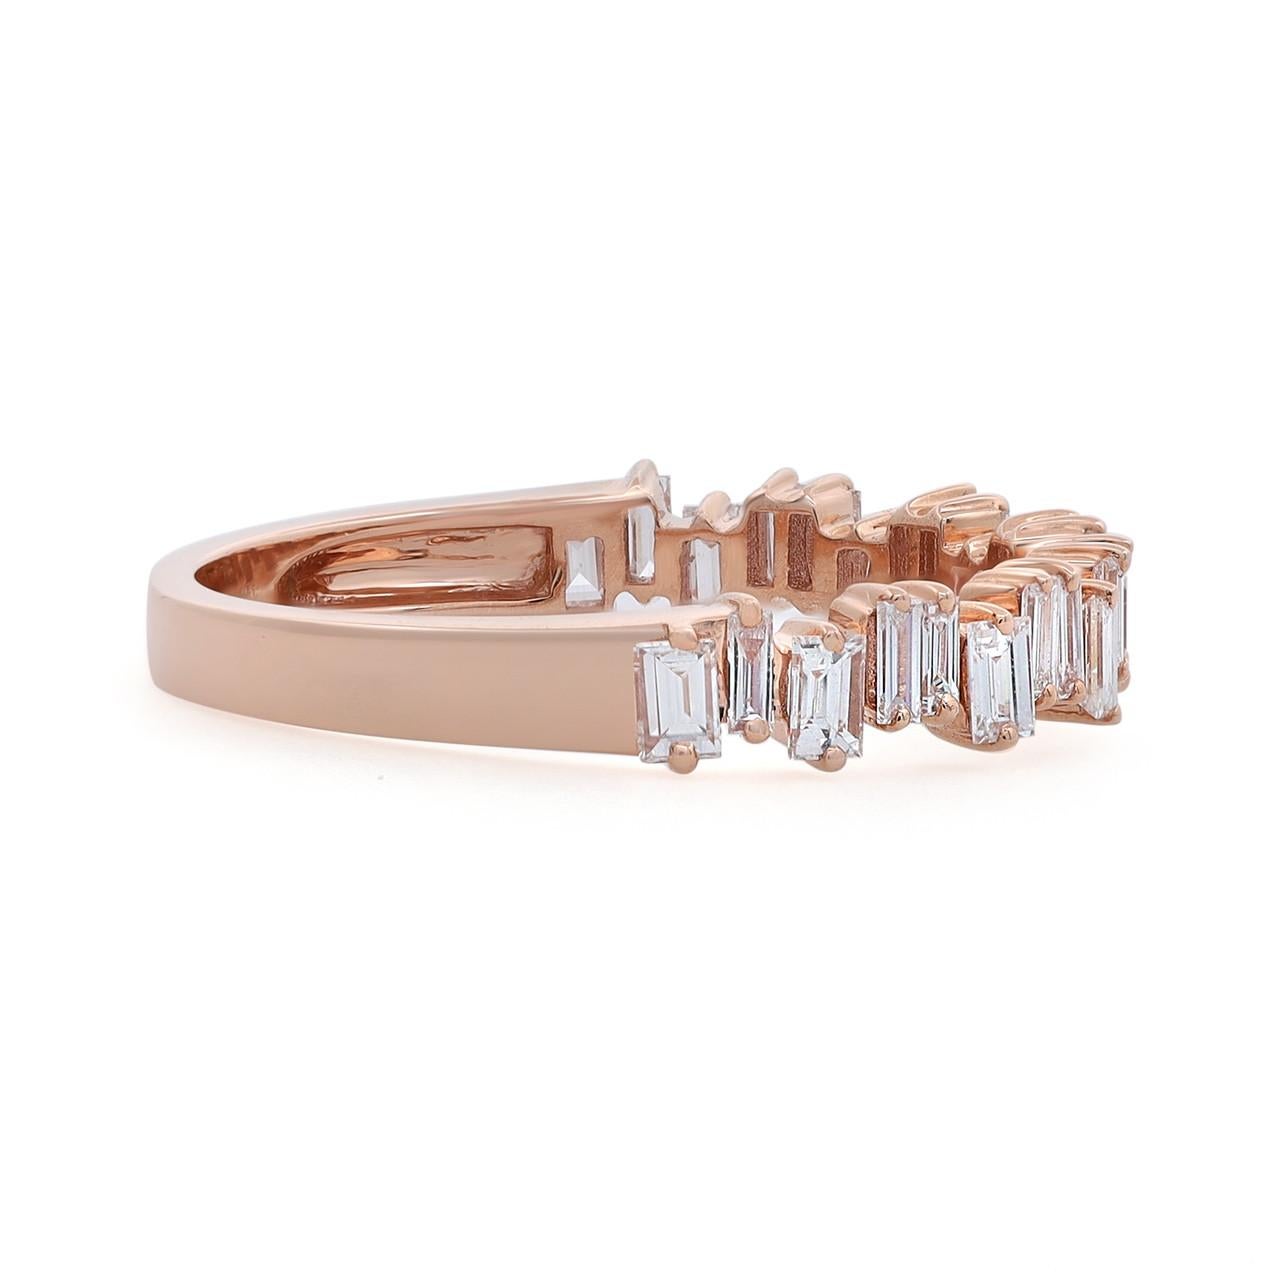 Start each day with a sash of sparkle with the 0.58 Carat Baguette Cut Diamond Ring in 18K Rose Gold. This extraordinary piece is bound to make you fall head over heels in love. The mesmerizing design features a captivating zig-zag pattern formed by